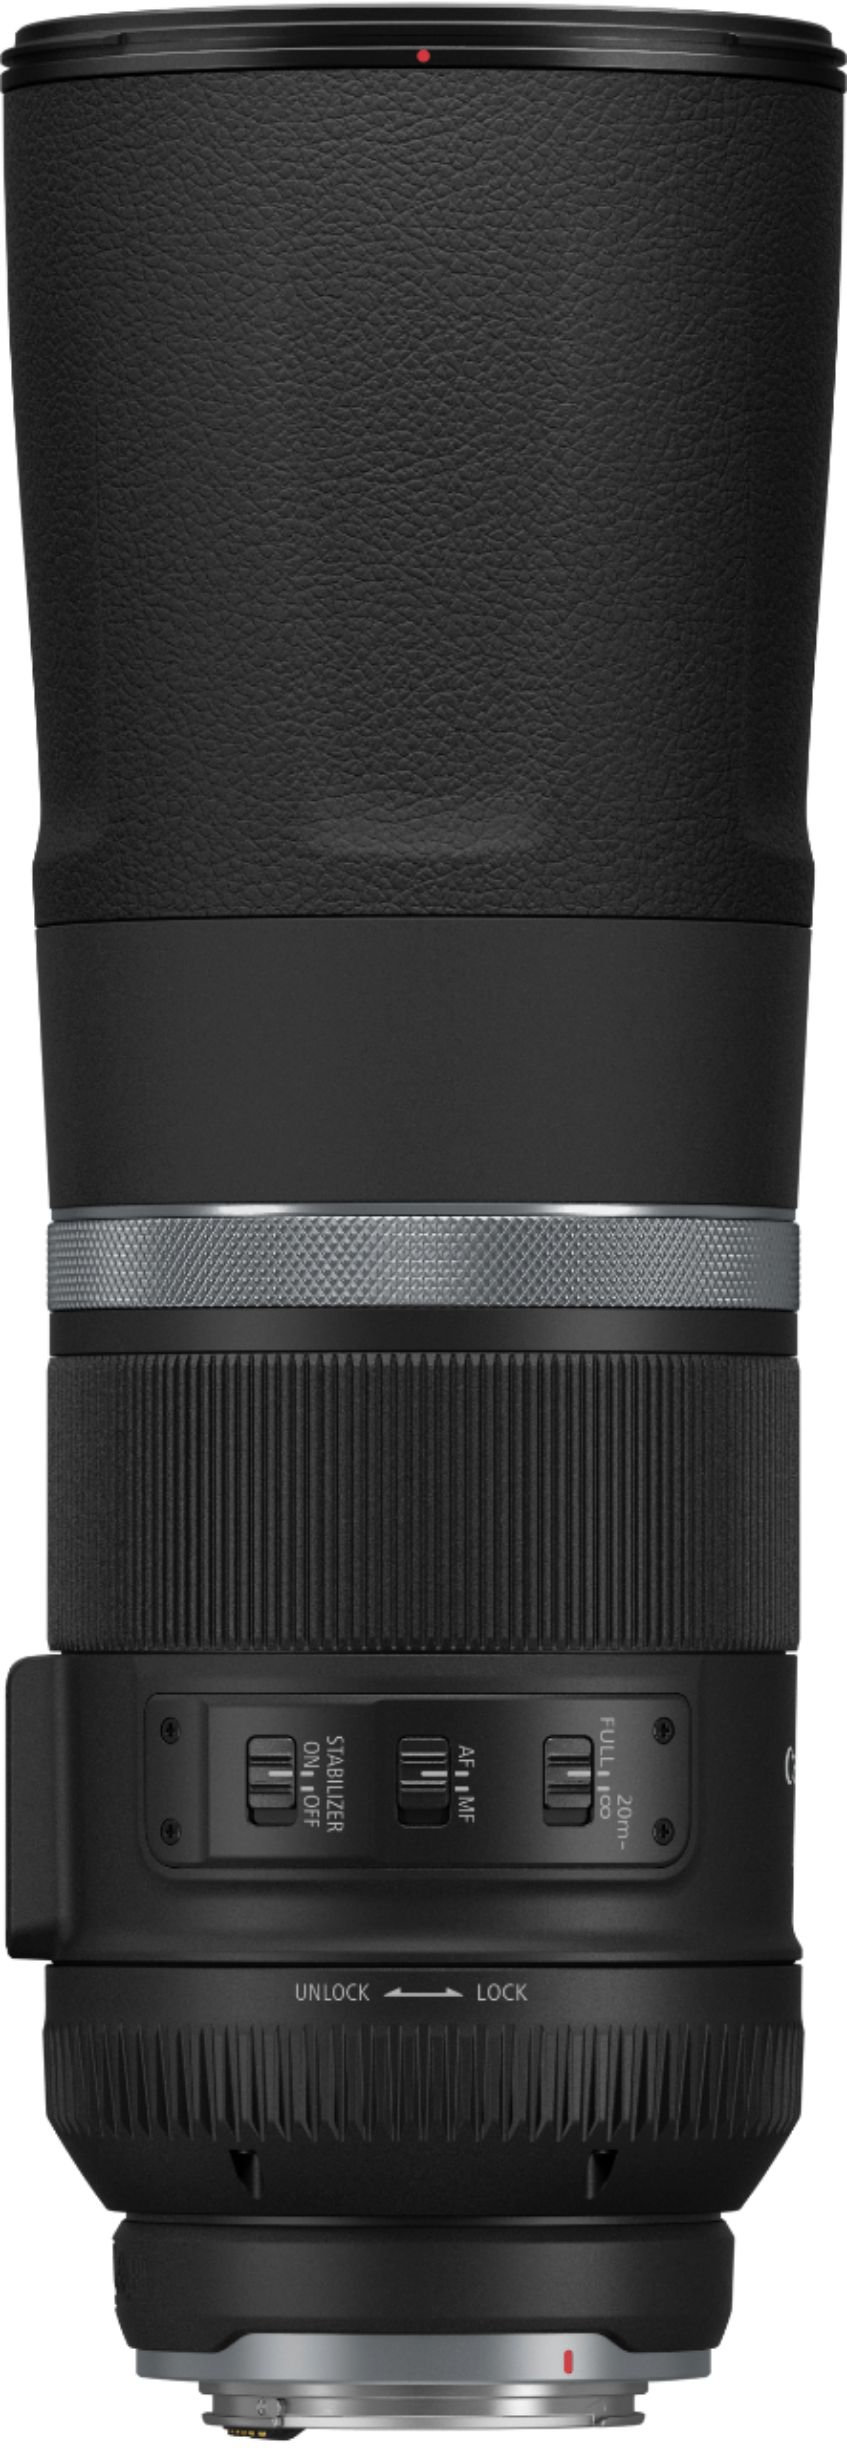 Back View: Canon - RF 600 f/4 L IS USM Telephoto Prime Lens for RF Mount Cameras - White